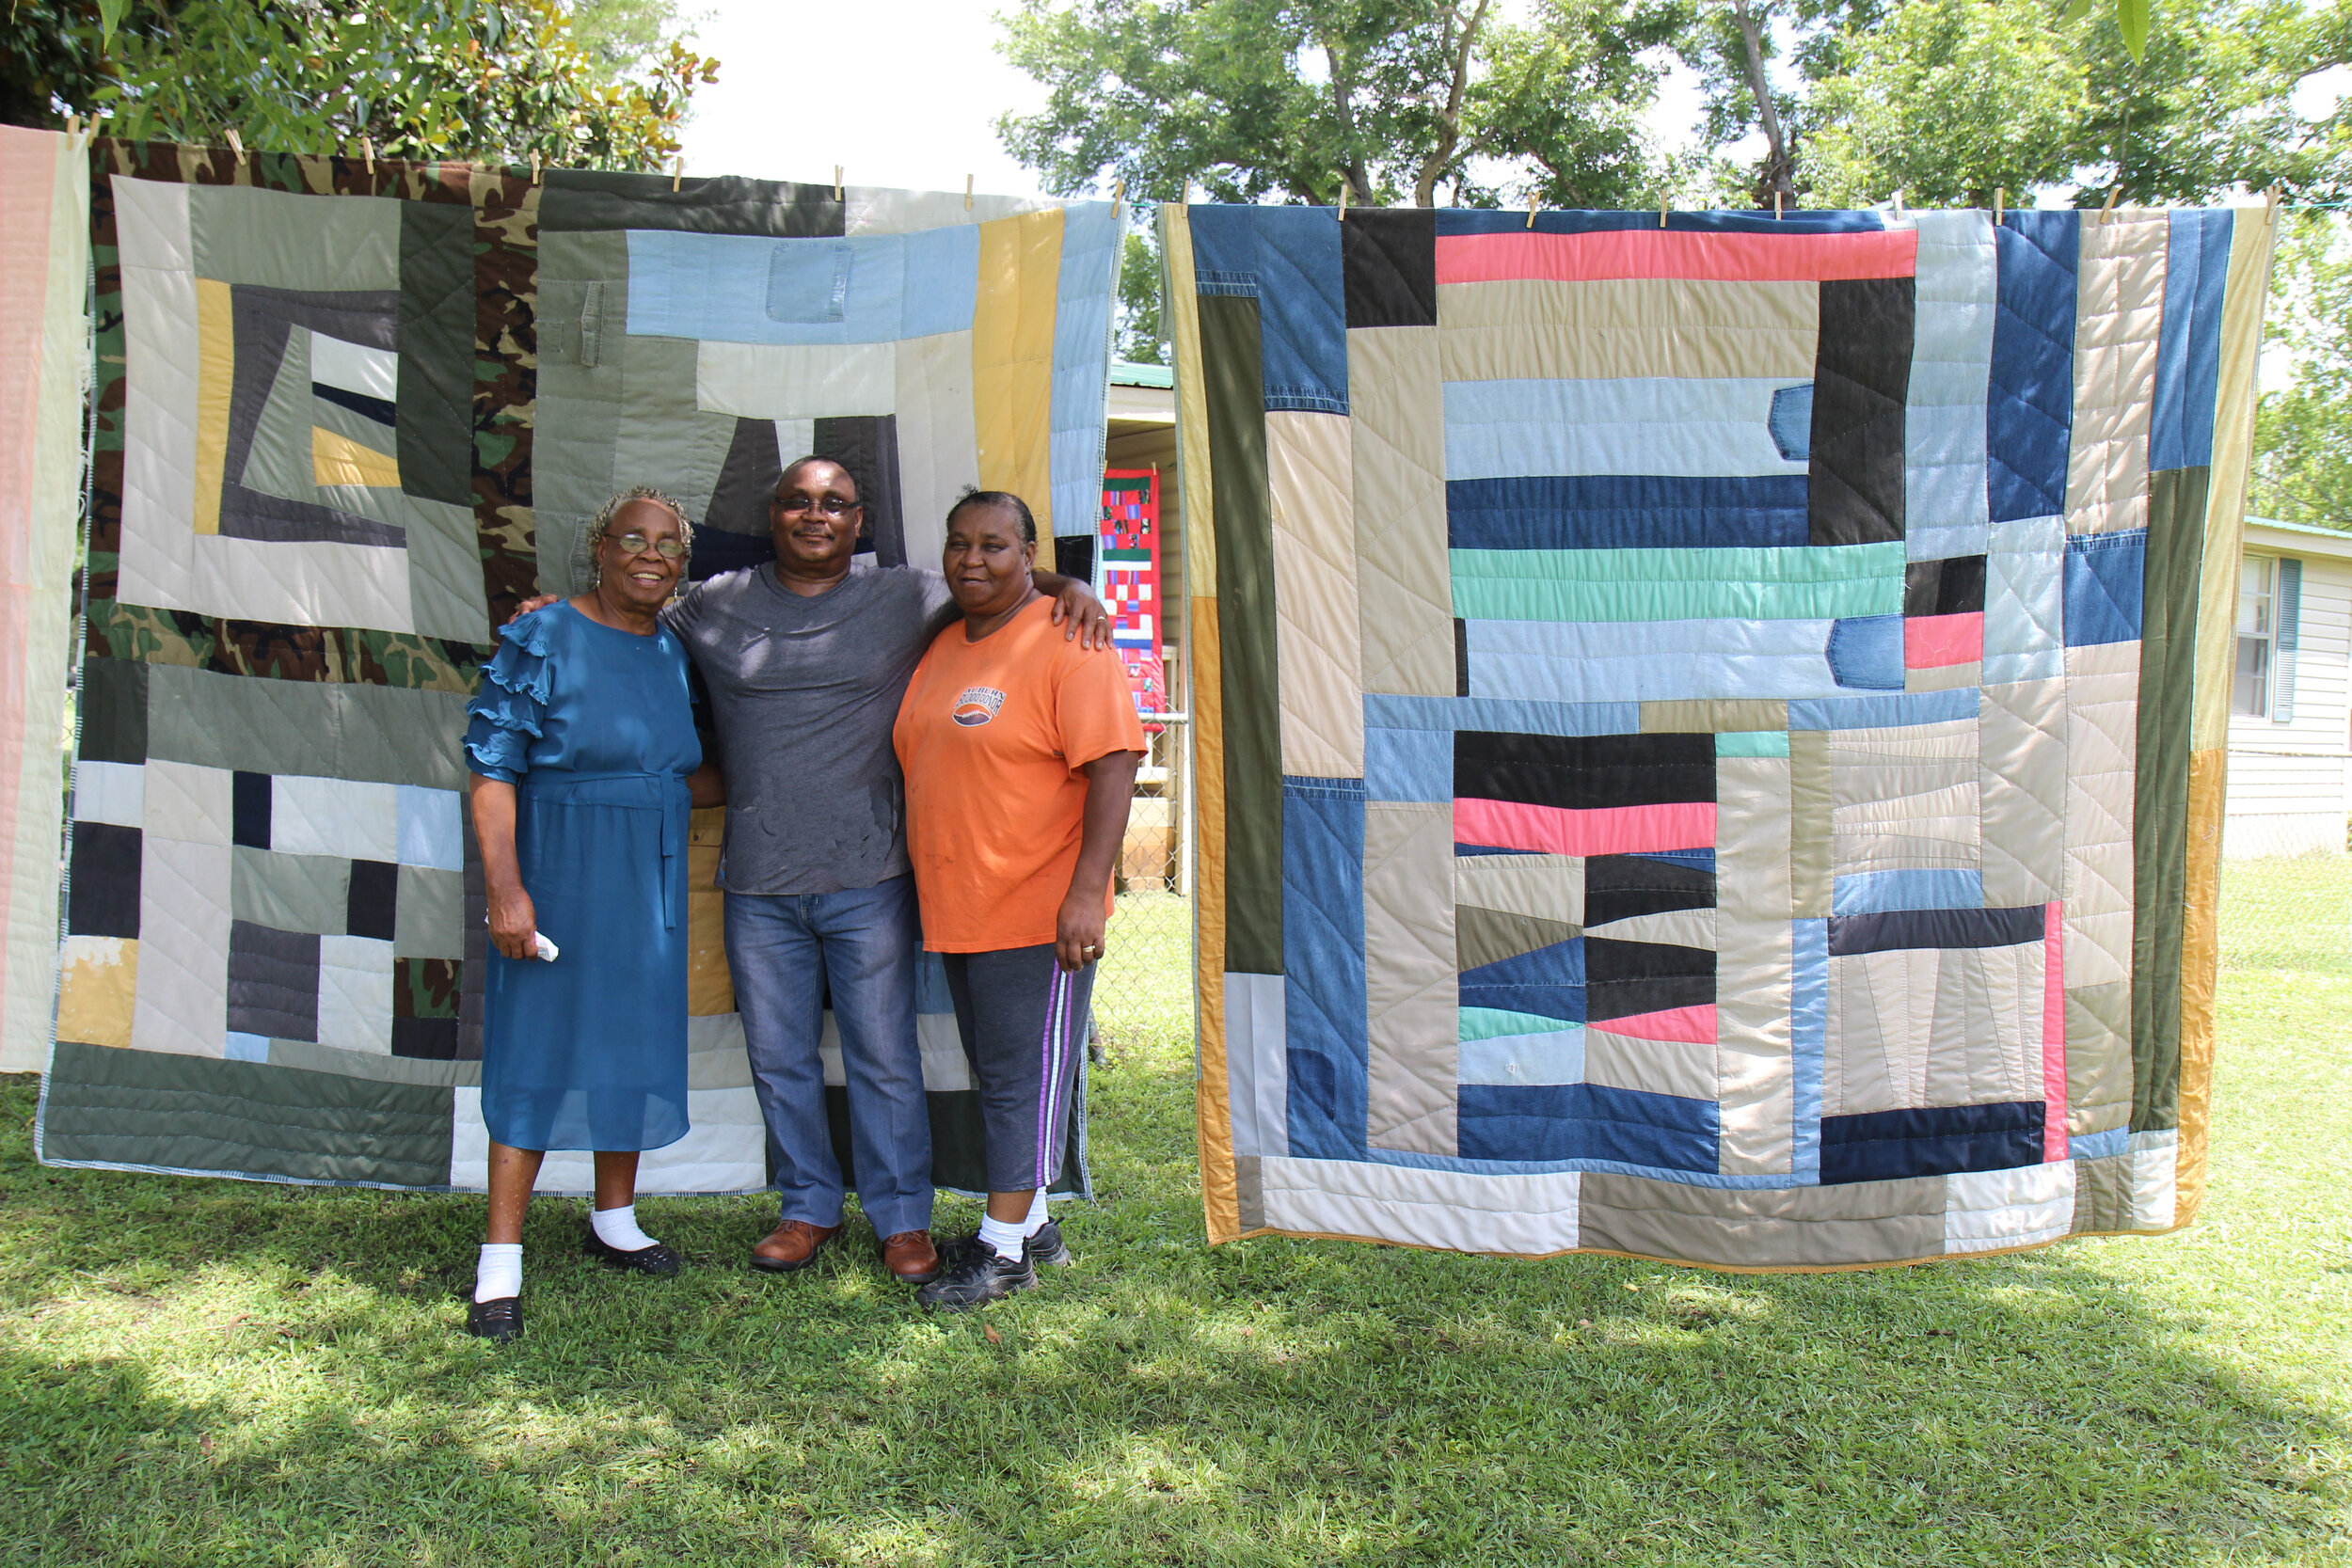  In July 2018, I traveled to Gee’s Bend, Alabama to research an exhibition,  Piece Together: The Quilts of Mary Lee Bendolph.  Mary Lee stands outside her home with two of her children, Rubin Bendolph Jr., and Essie Bendolph Pettway. Essie’s quilts h